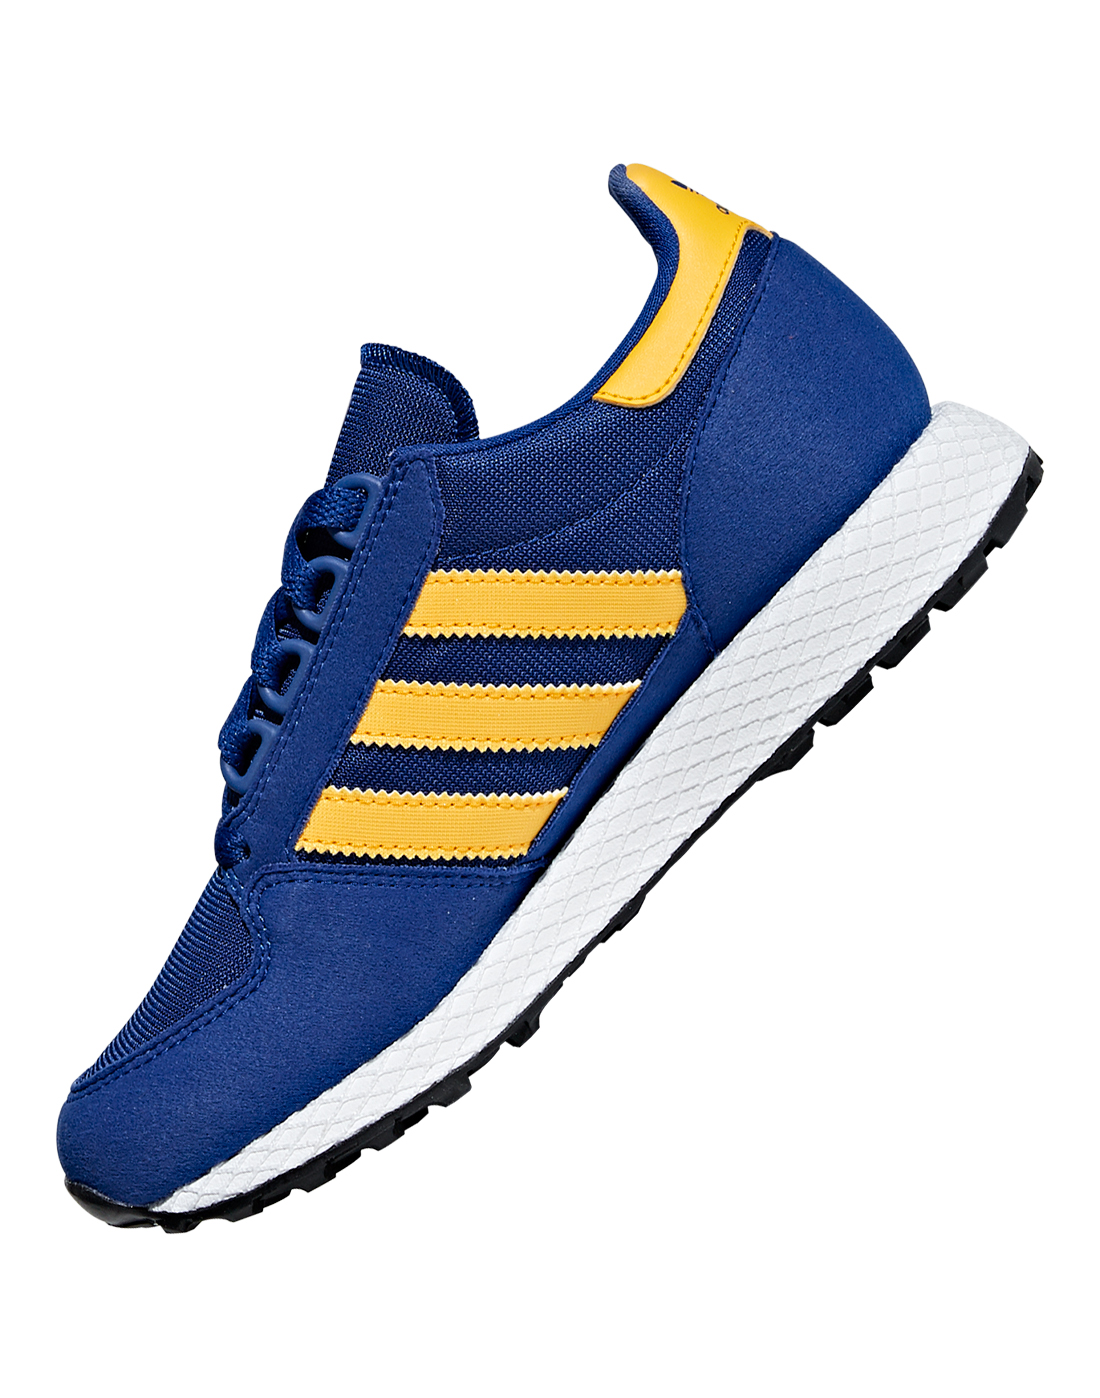 adidas forest grove blue yellow